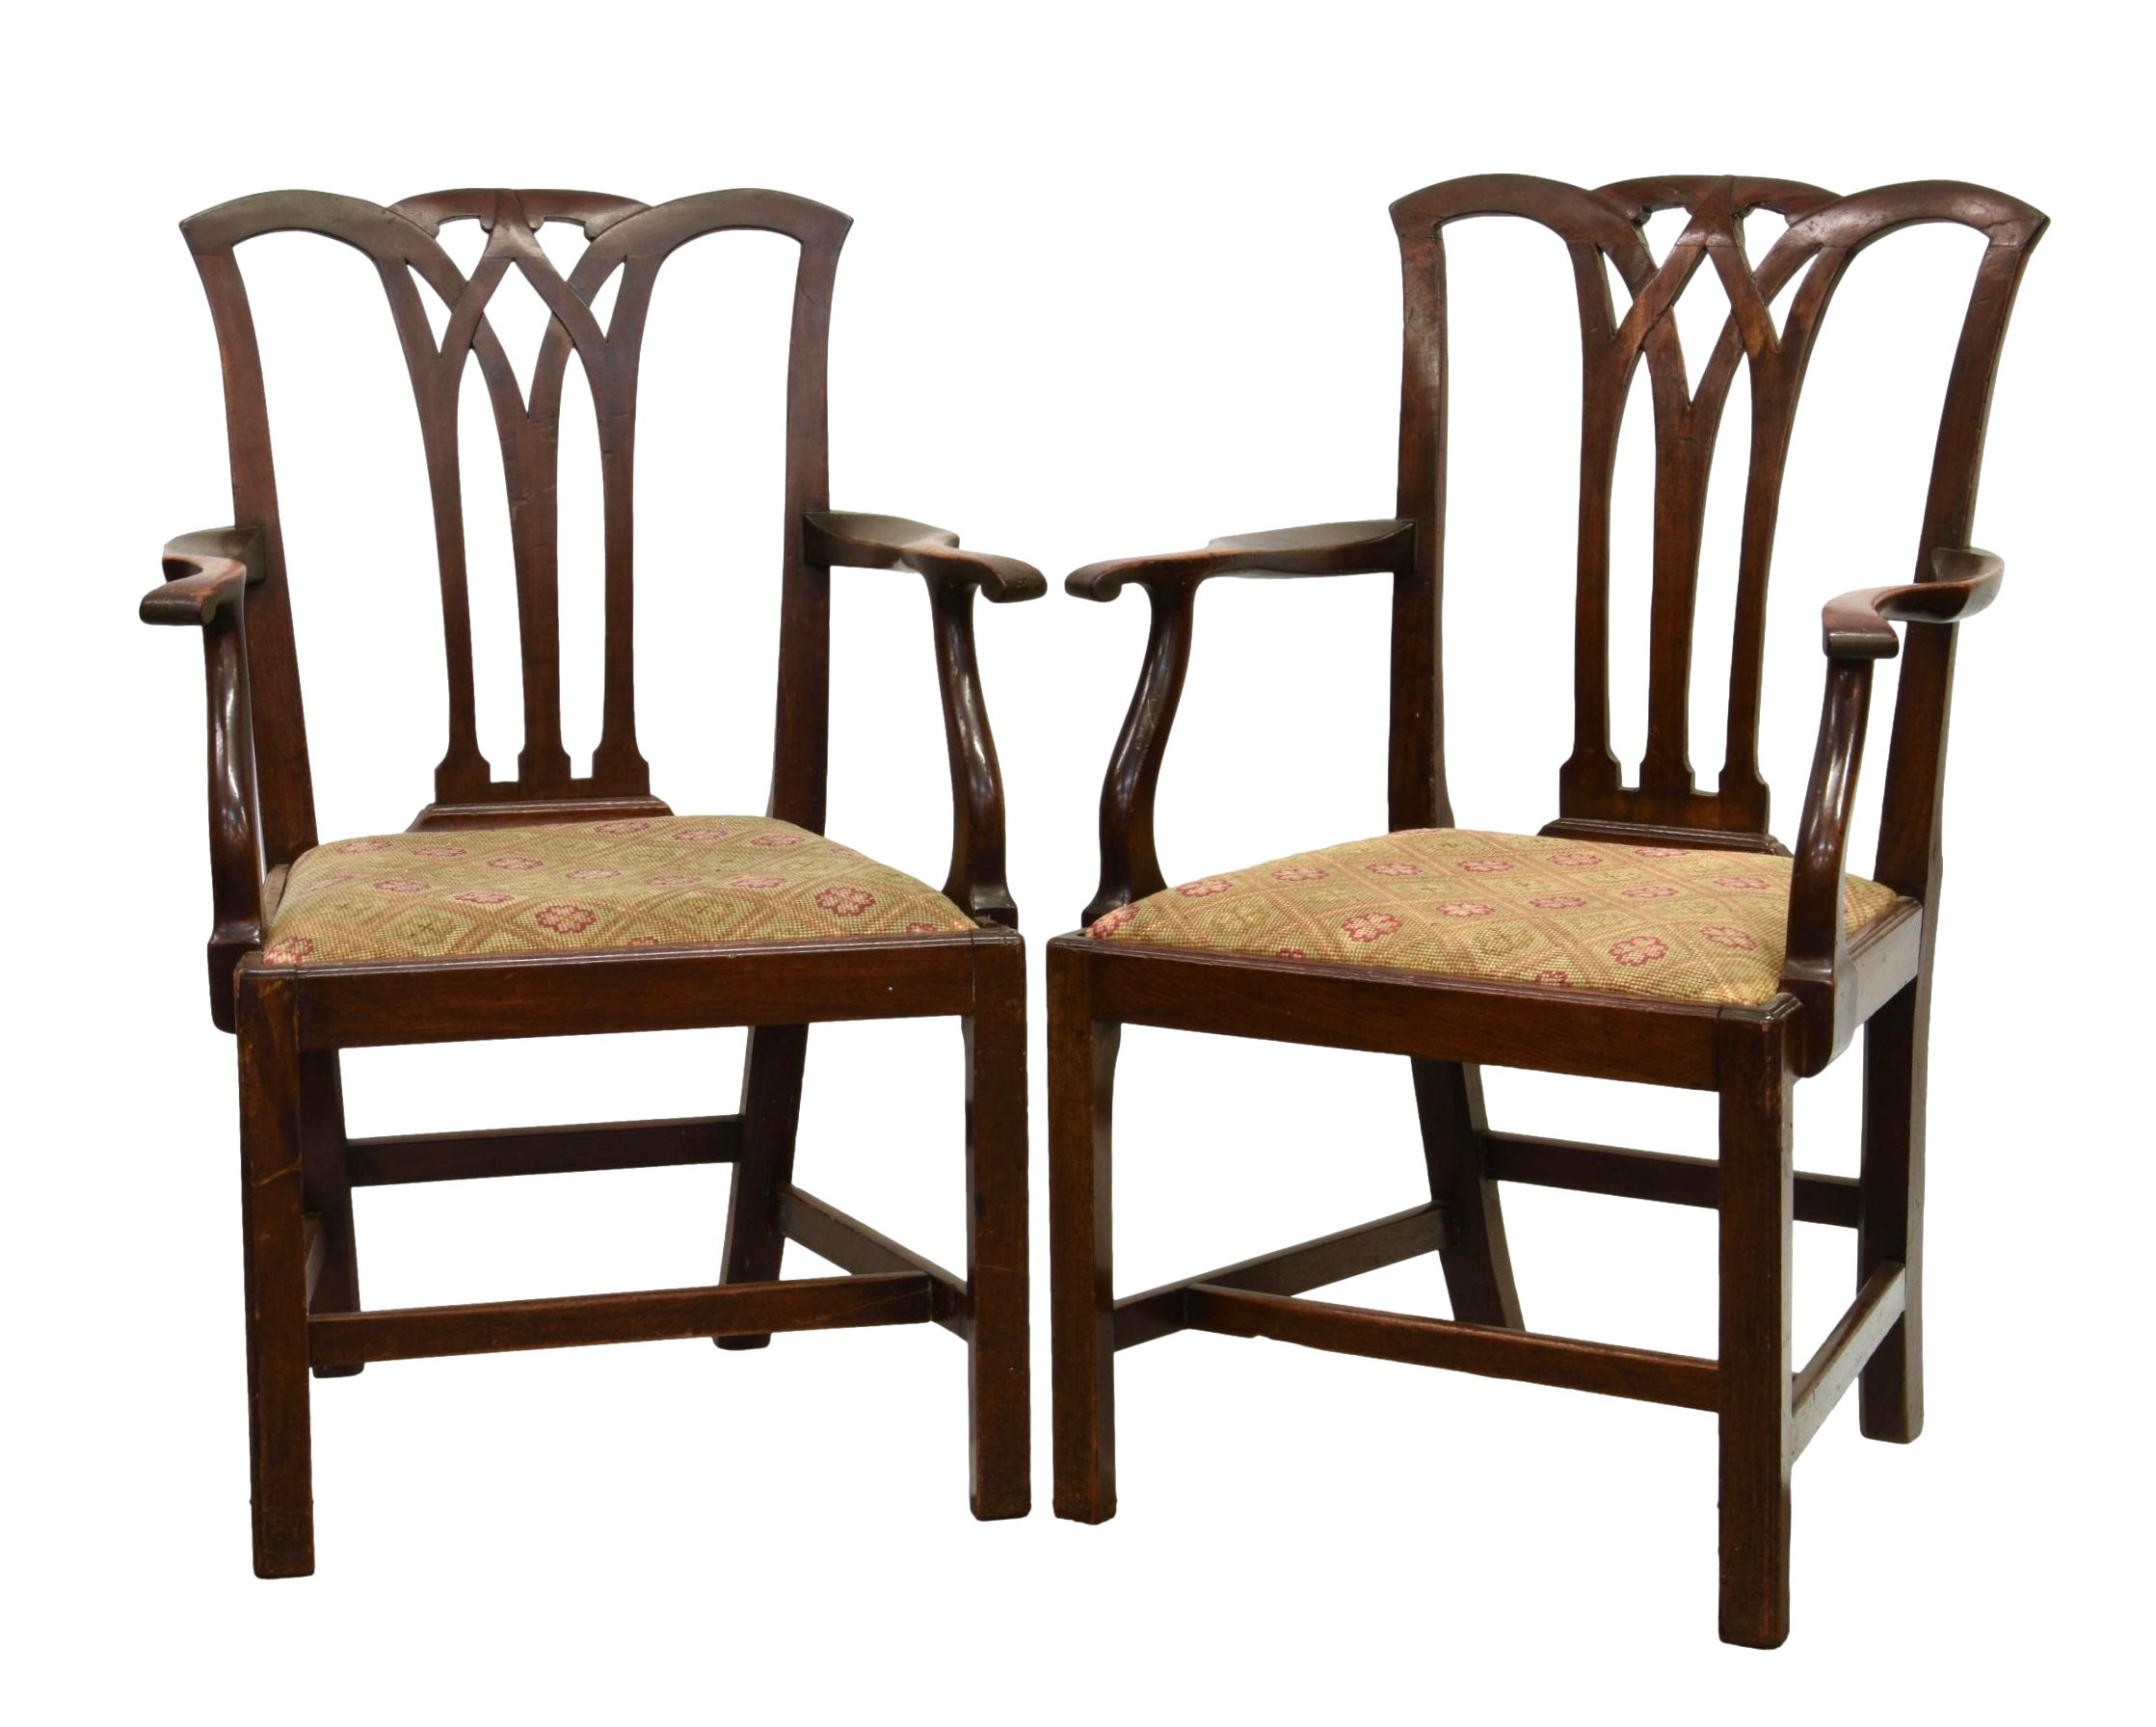 A pair of 18th century mahogany elbow dining chairs, with Chippendale style lattice backs over